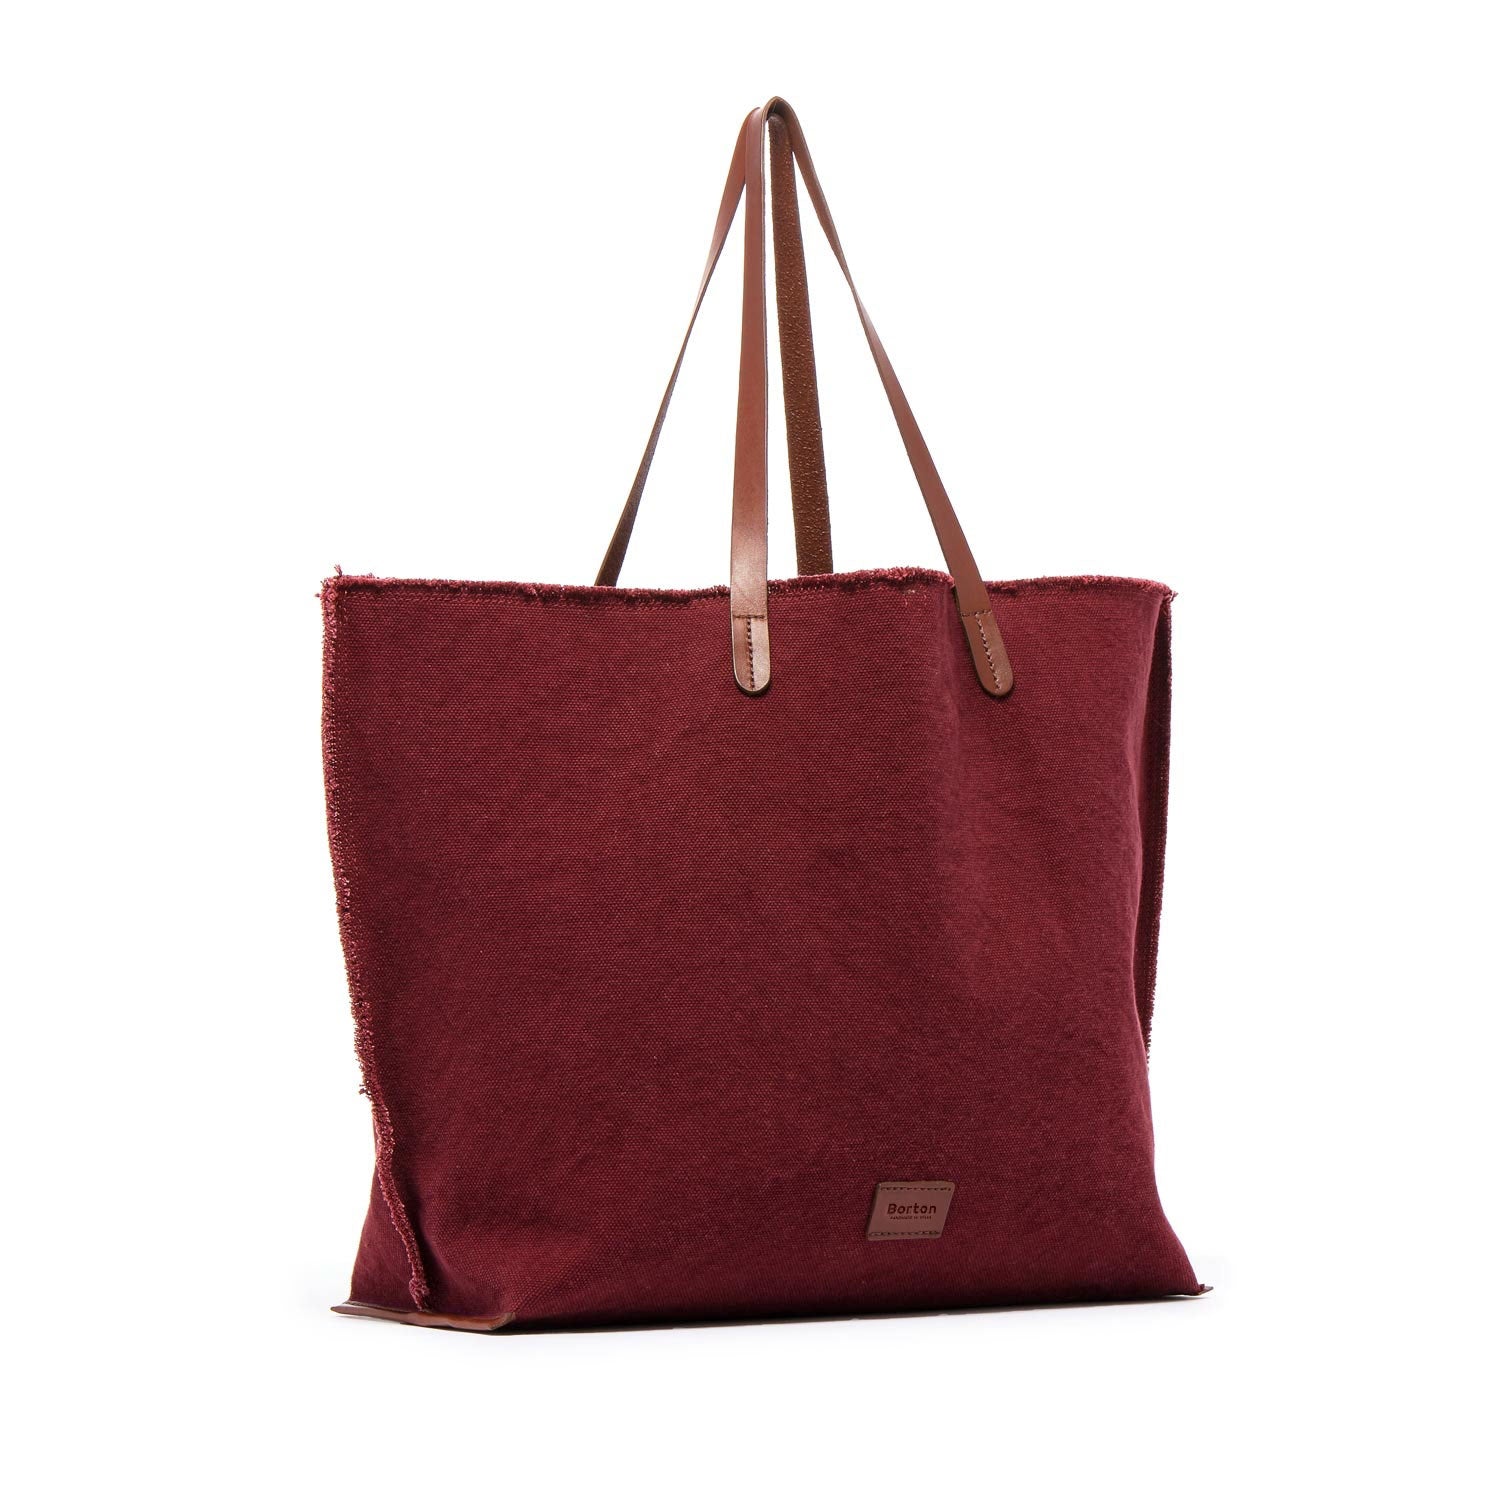 Mery Maxi Tote Burgundy Canvas & Tan Leather